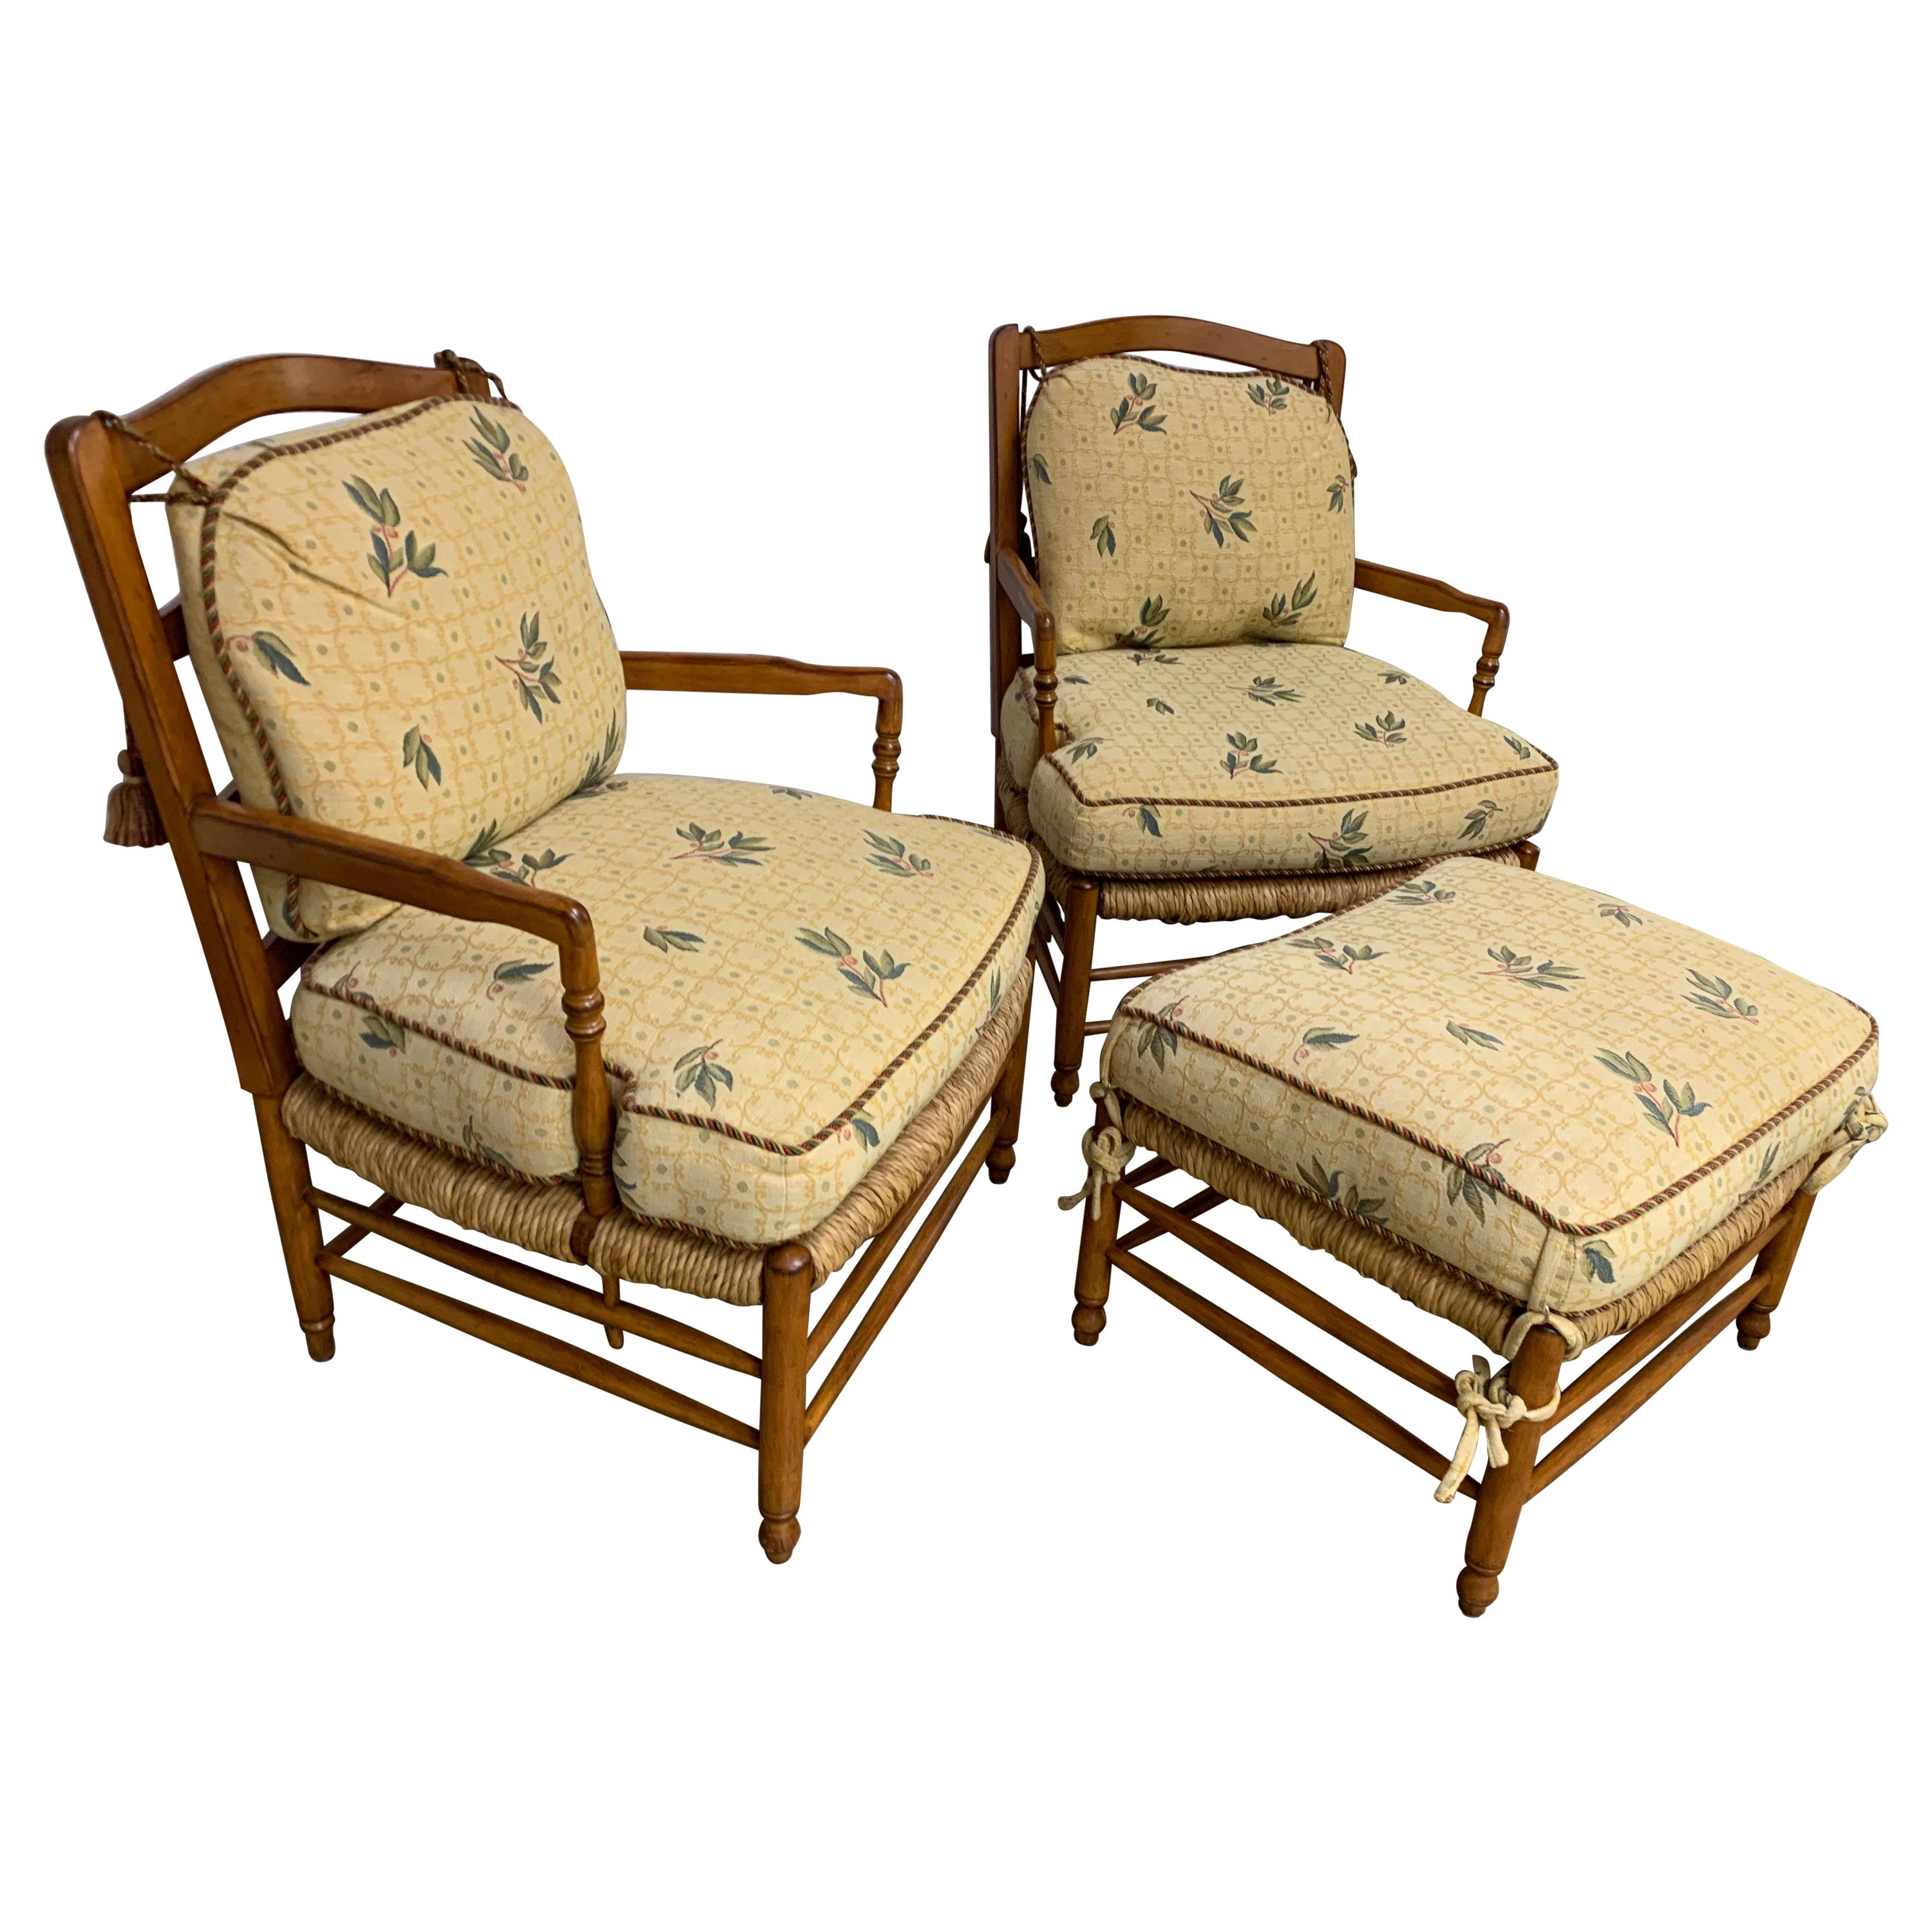 Brunschwig & Fils French Country Armchairs and Ottoman, Set of 3 For Sale